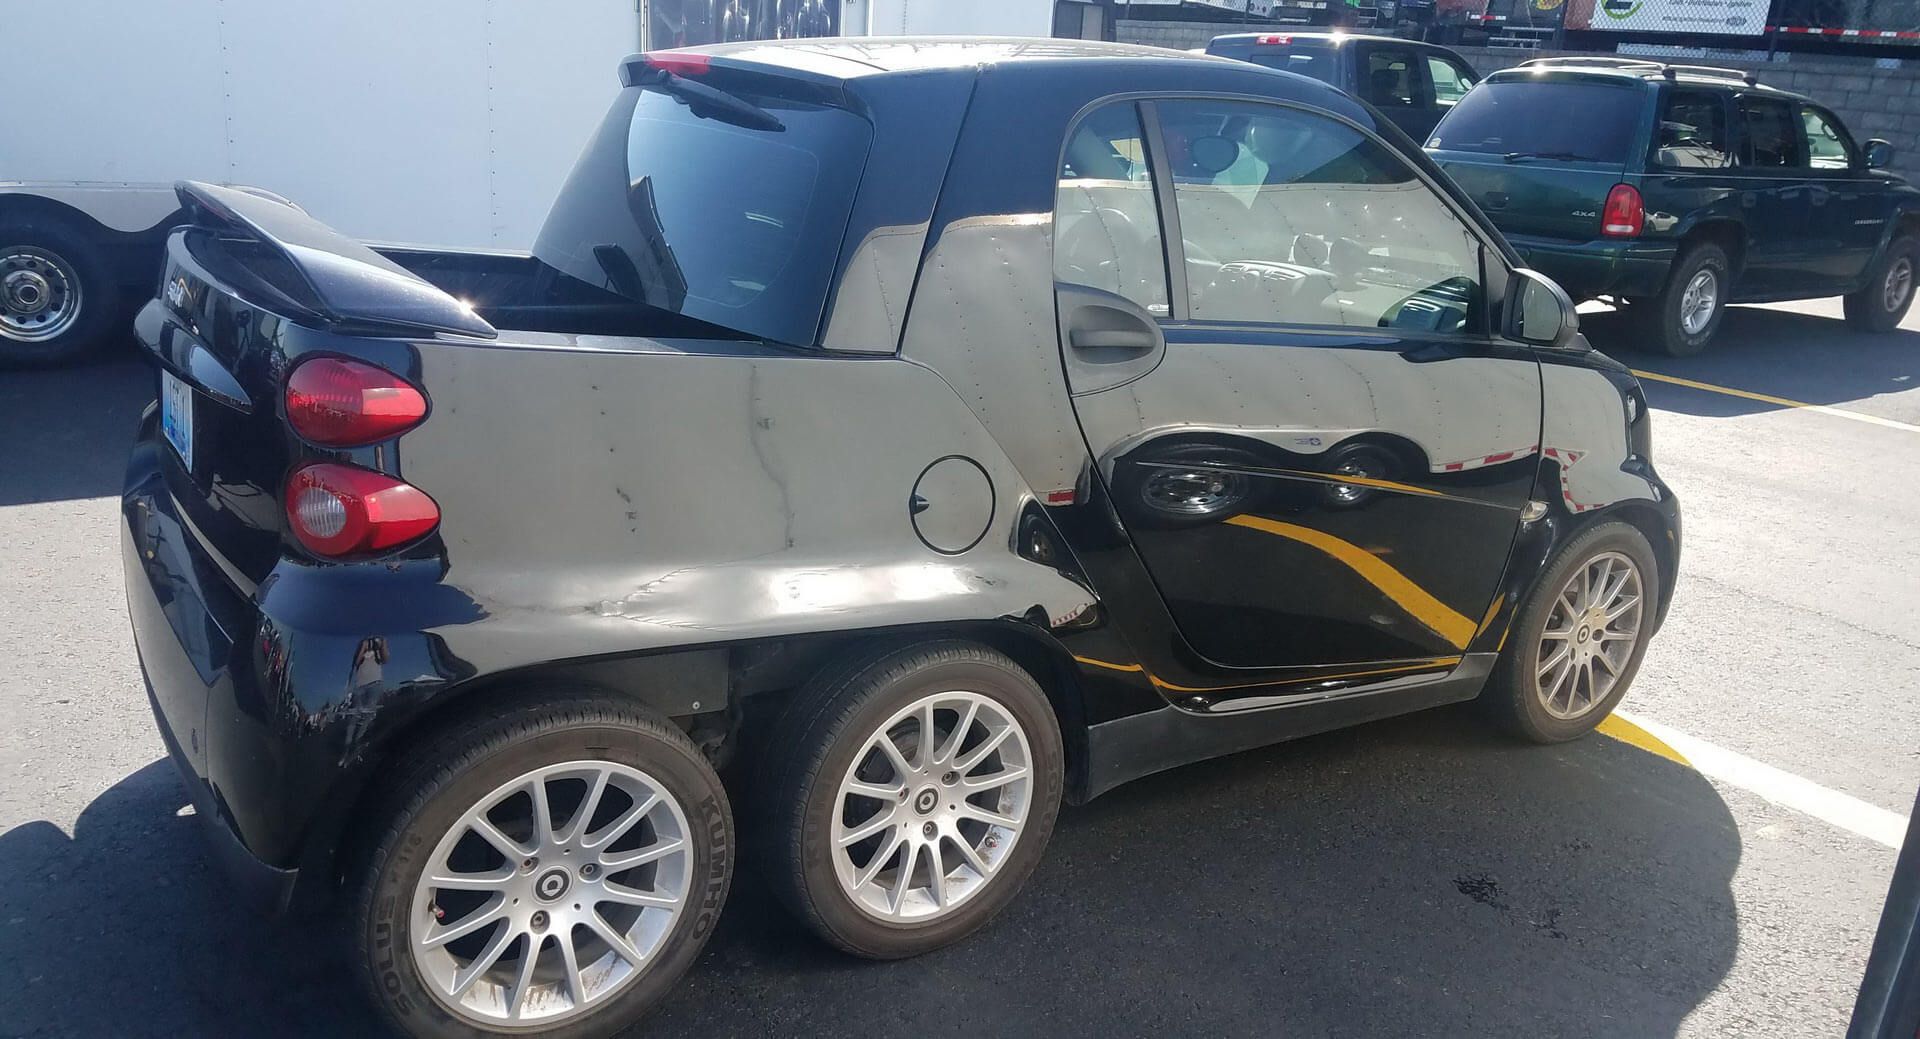 6×6 Mania Engulfs Smart ForTwo Owner, Try Not To Laugh | Carscoops